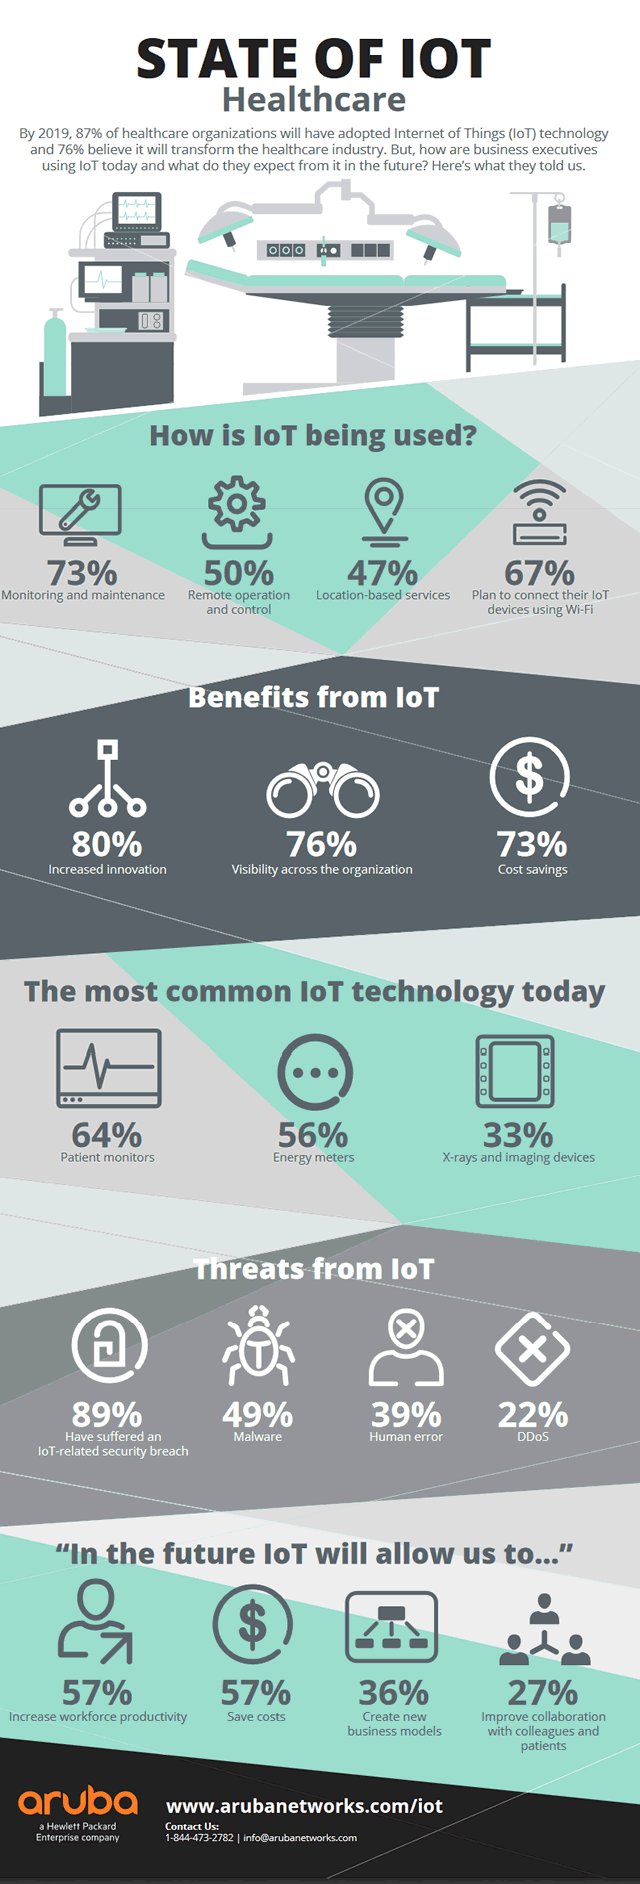 State of IoT Healthcare infographic by Aruba Networks - info on the research - larger infographic